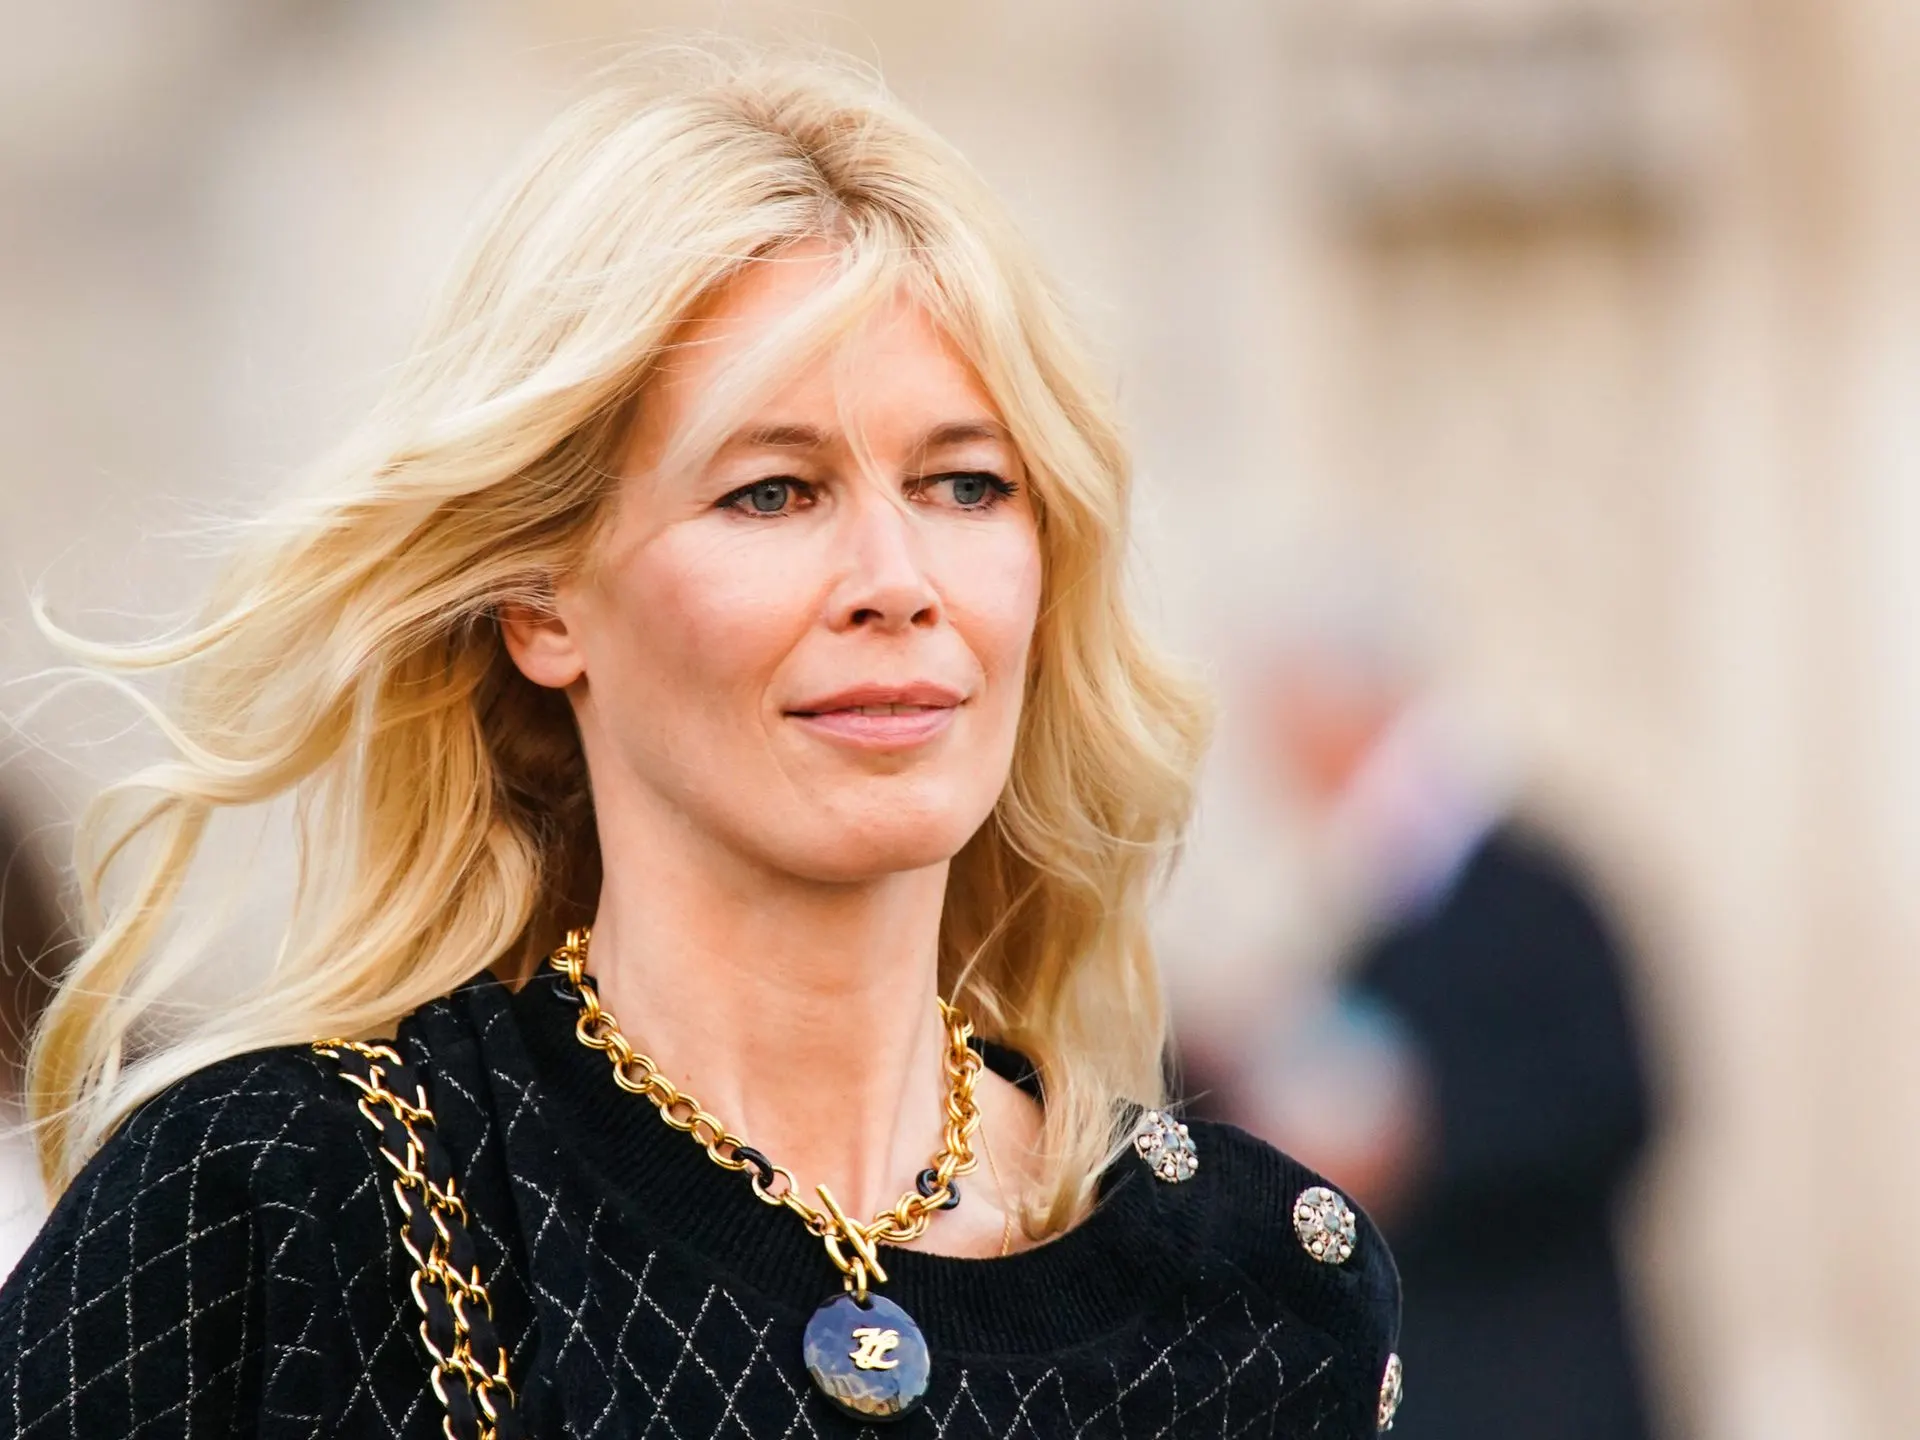 Who Is Claudia Schiffer? Age, Bio, Career And More